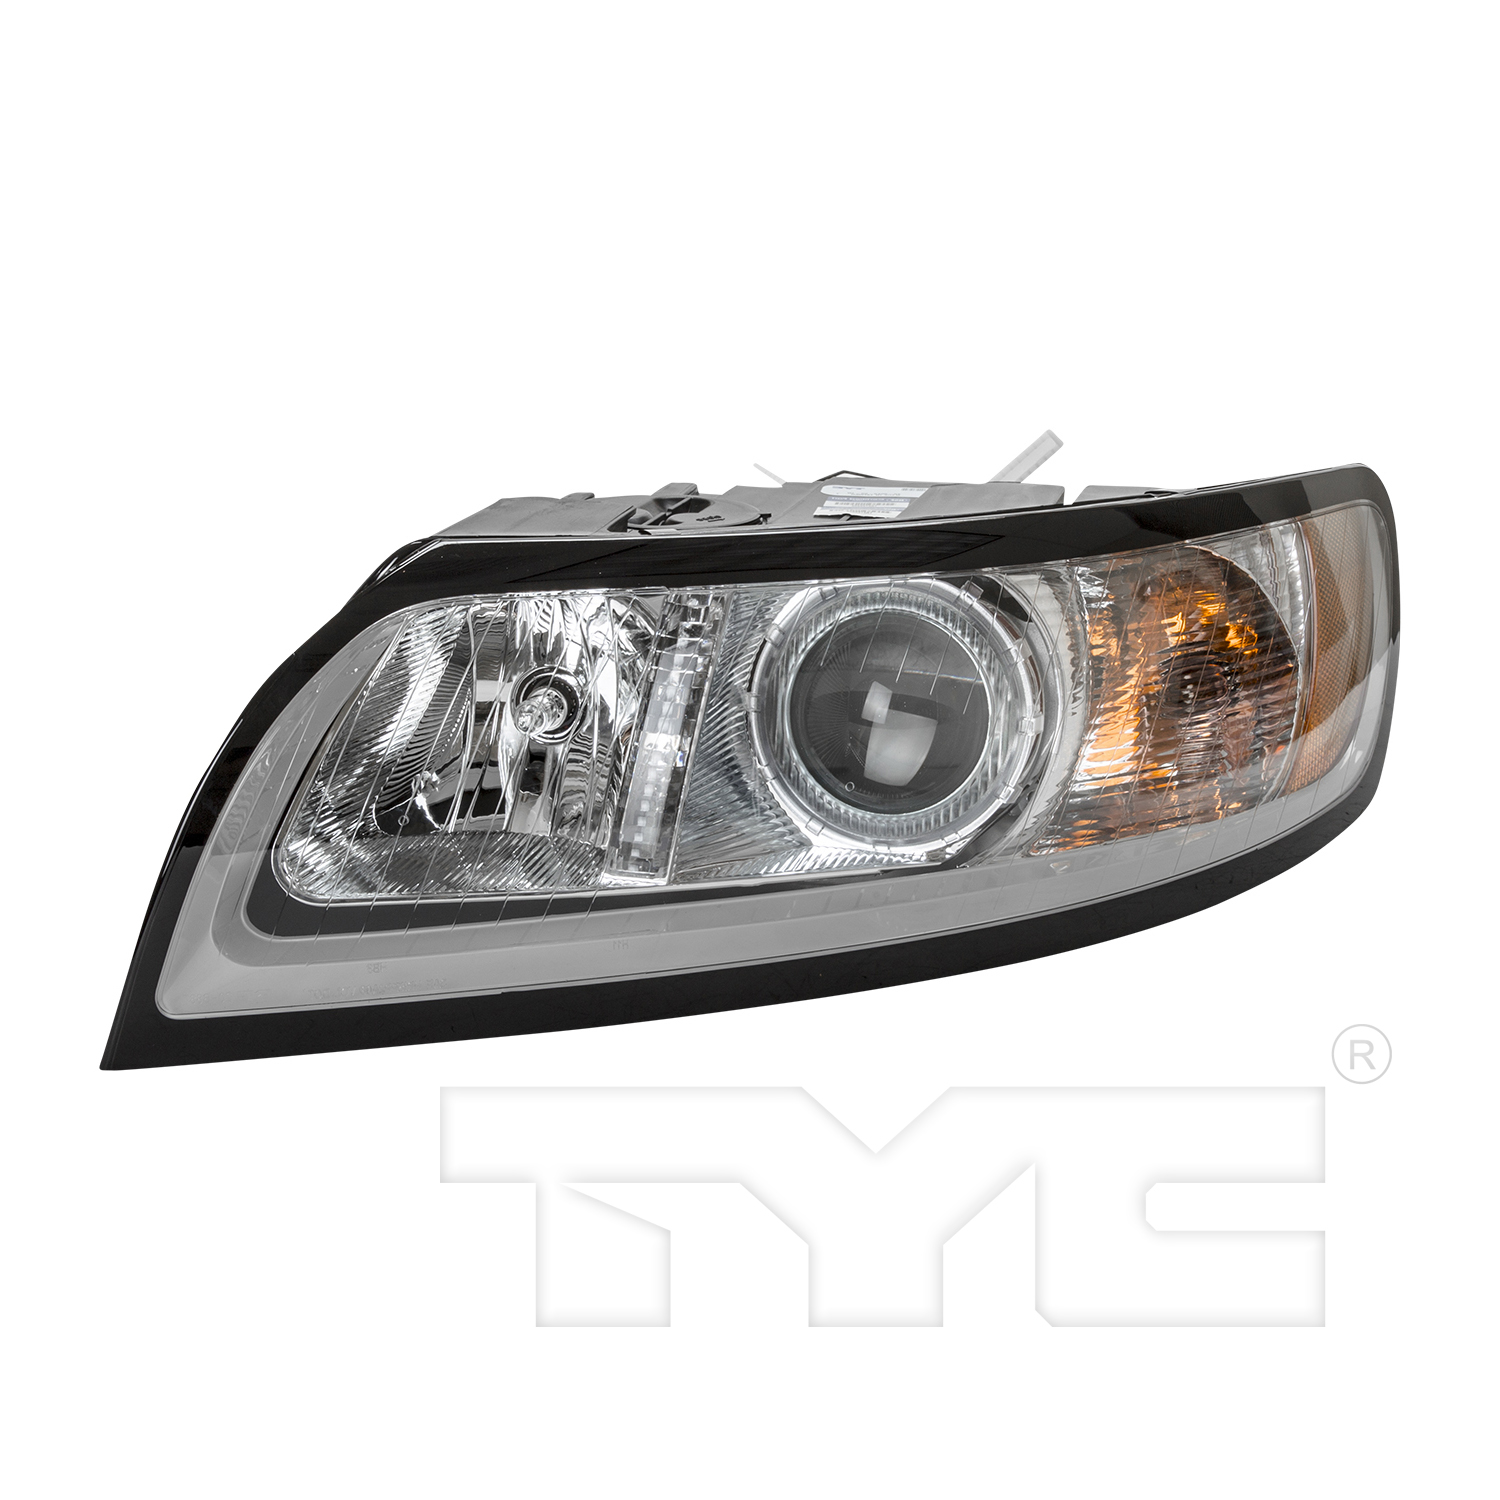 Aftermarket HEADLIGHTS for VOLVO - S40, S40,08-11,LT Headlamp assy composite